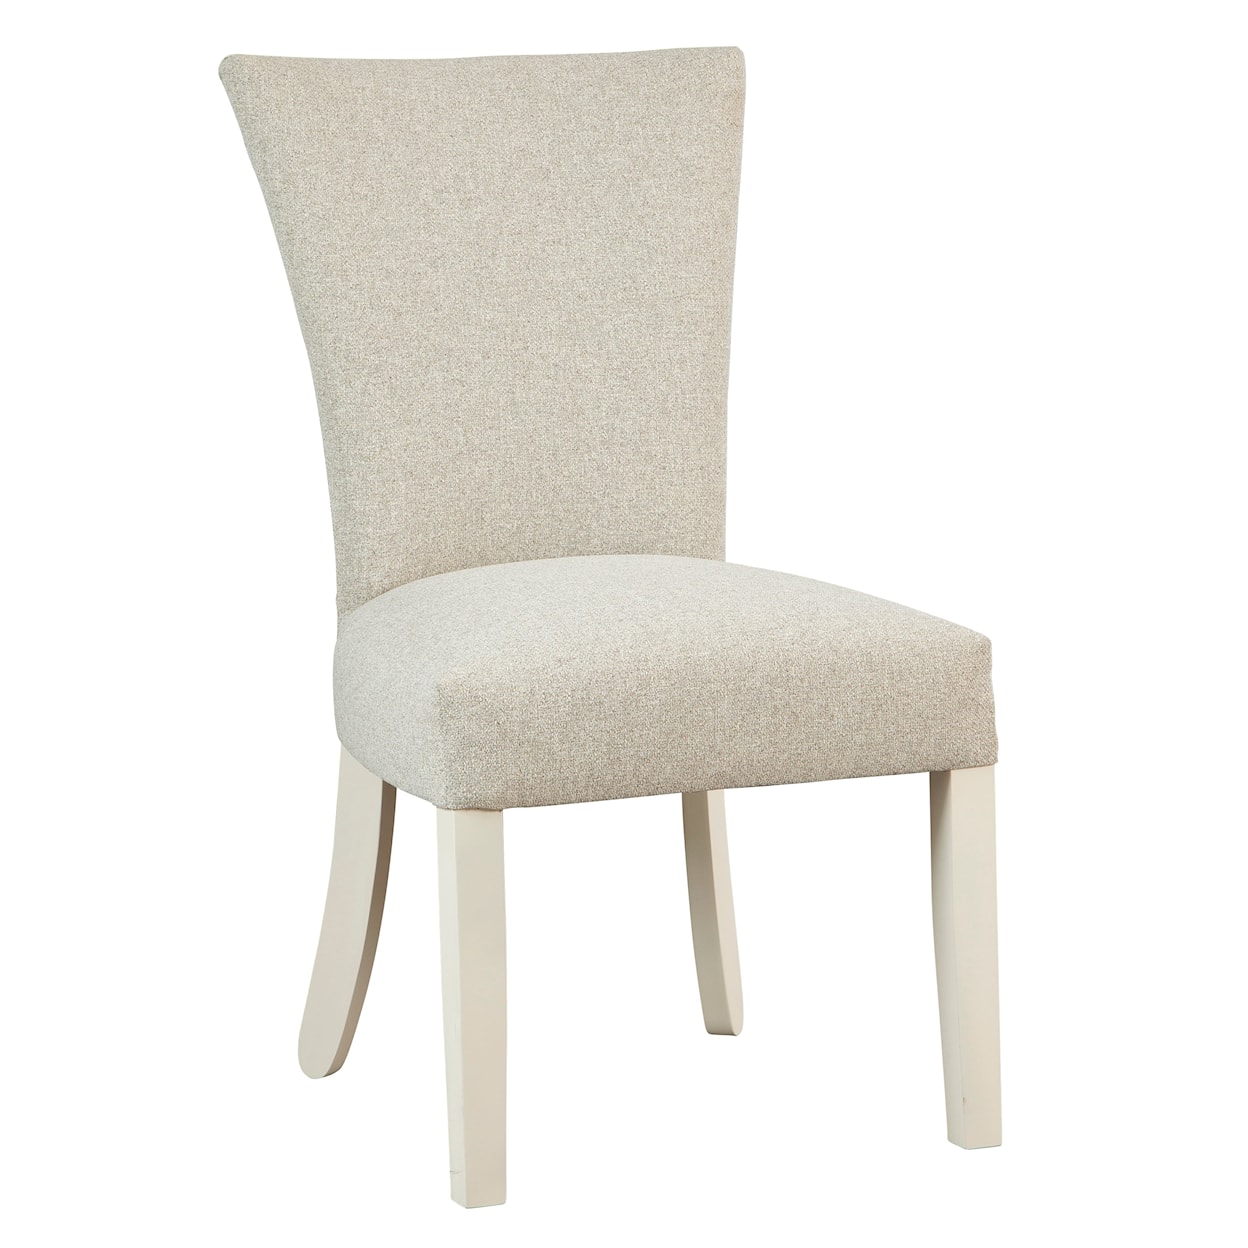 Hekman Upholstery Jeanette III Dining Chair